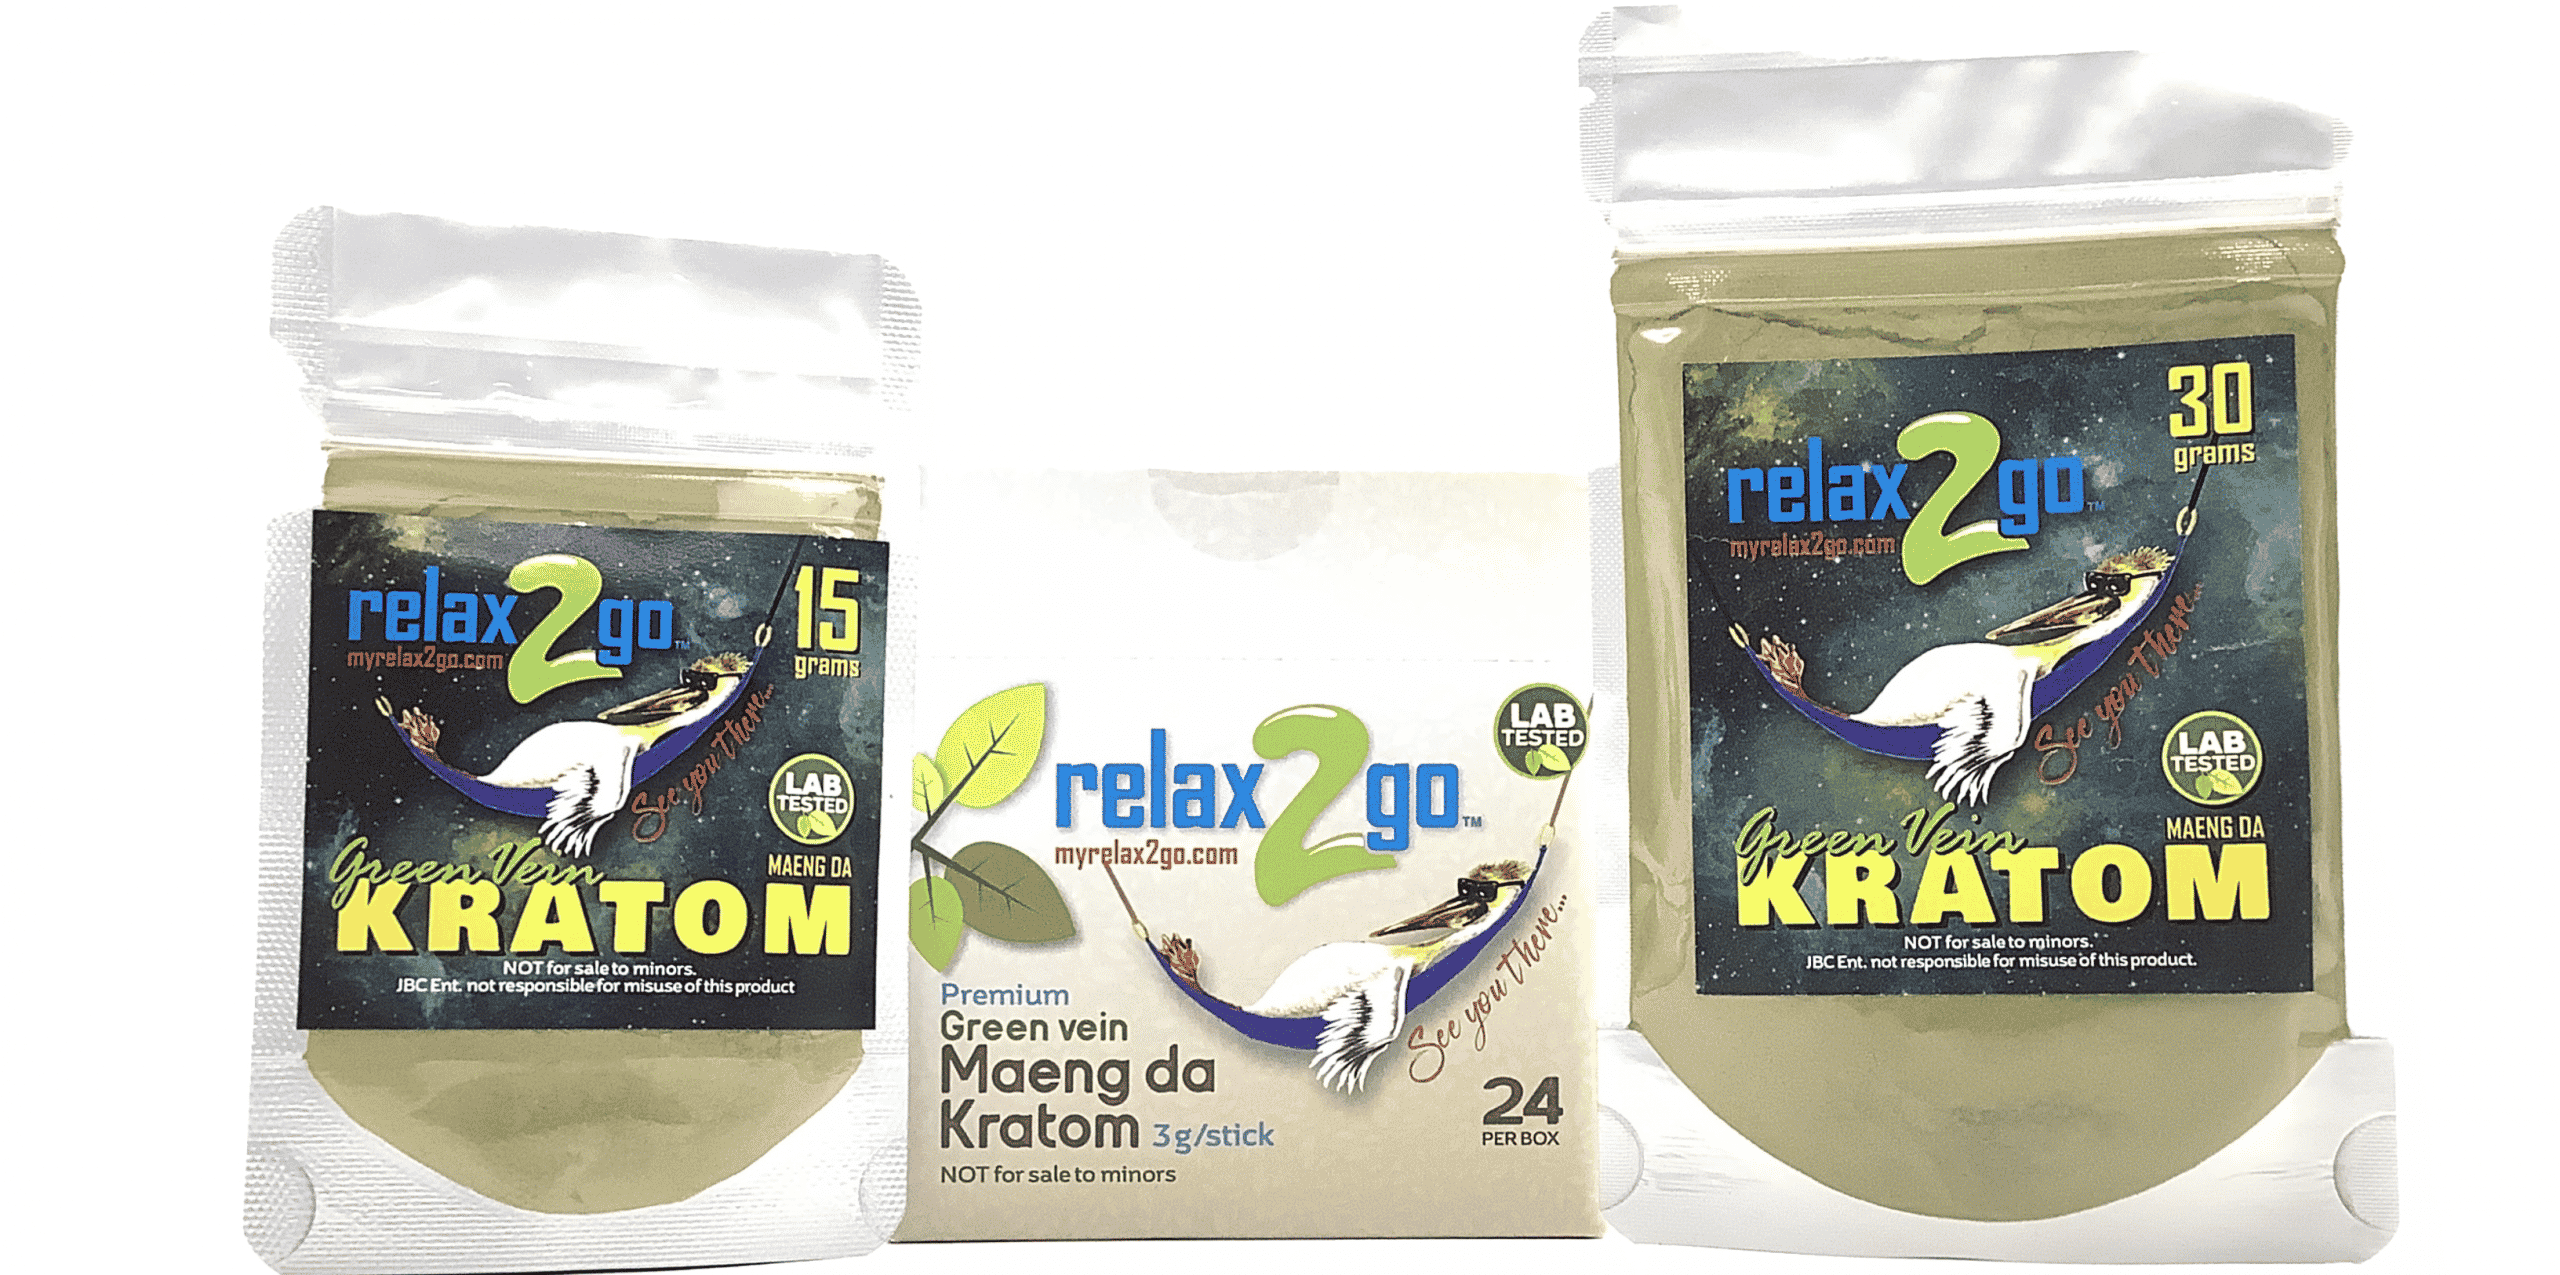 image of relax 2 go kratom products